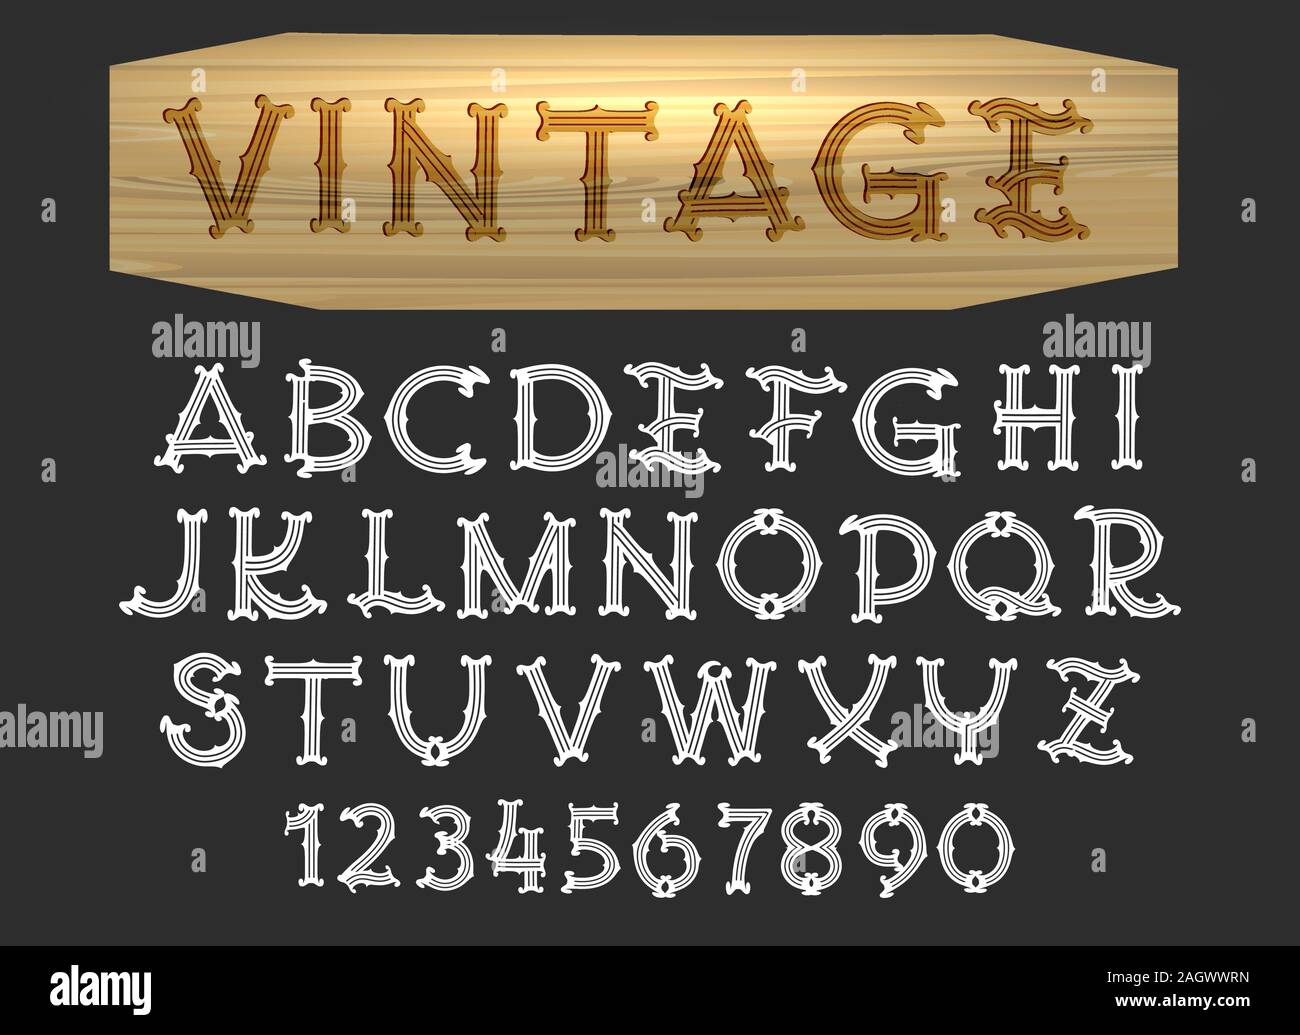 Vintage font in wood cut style. All letters isolated on white background. Vector illustration. Stock Vector